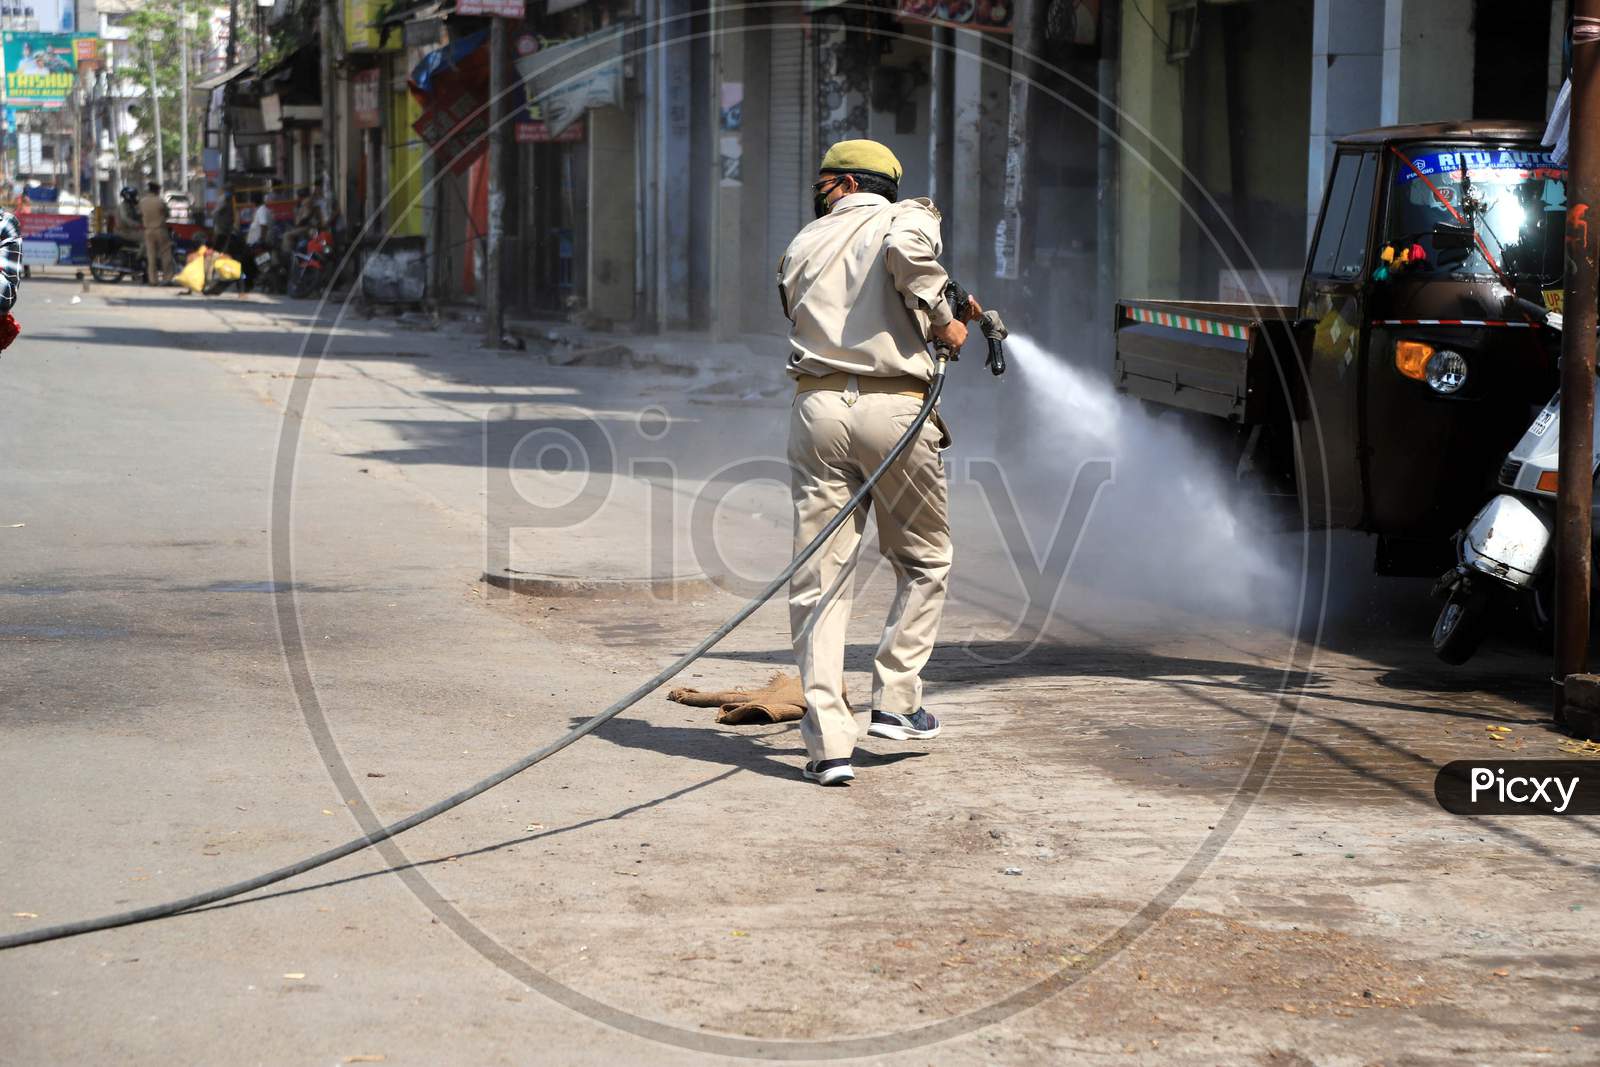 Firefighter Spray Disinfectant At Corona Positive Hot Spot Area During Nationwide Lockdown In Wake Of Coronavirus or covid-19 Pandemic In Prayagraj, March 13, 2020.